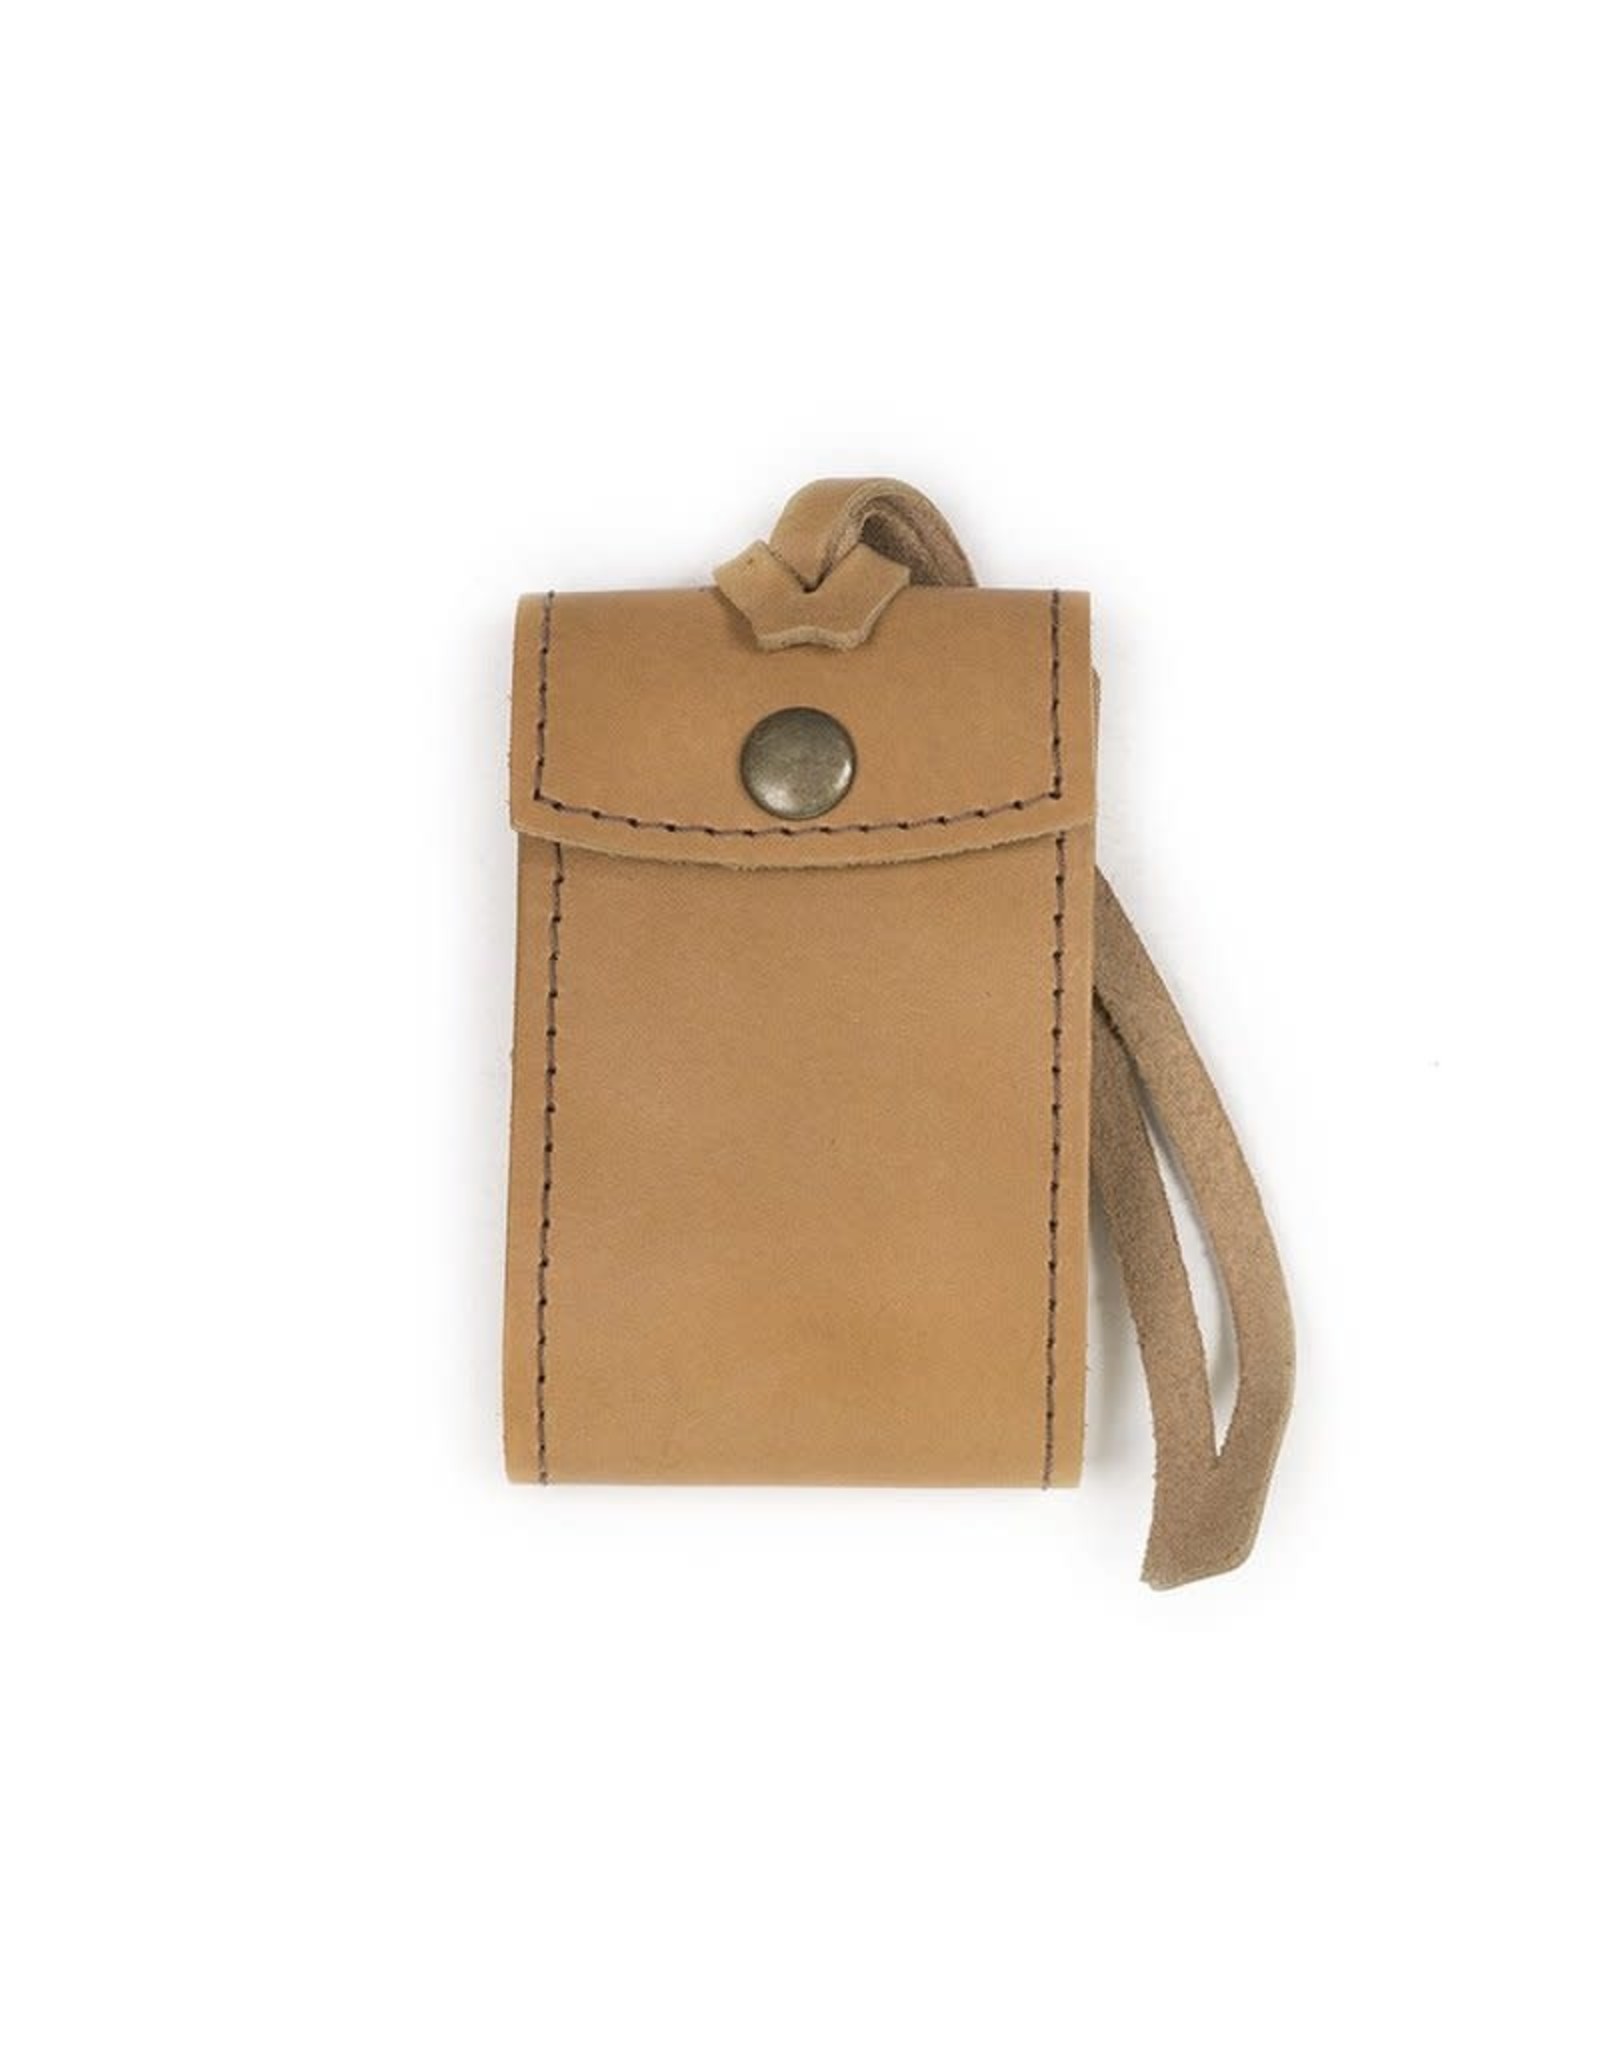 Rustico Security Leather Luggage Tags